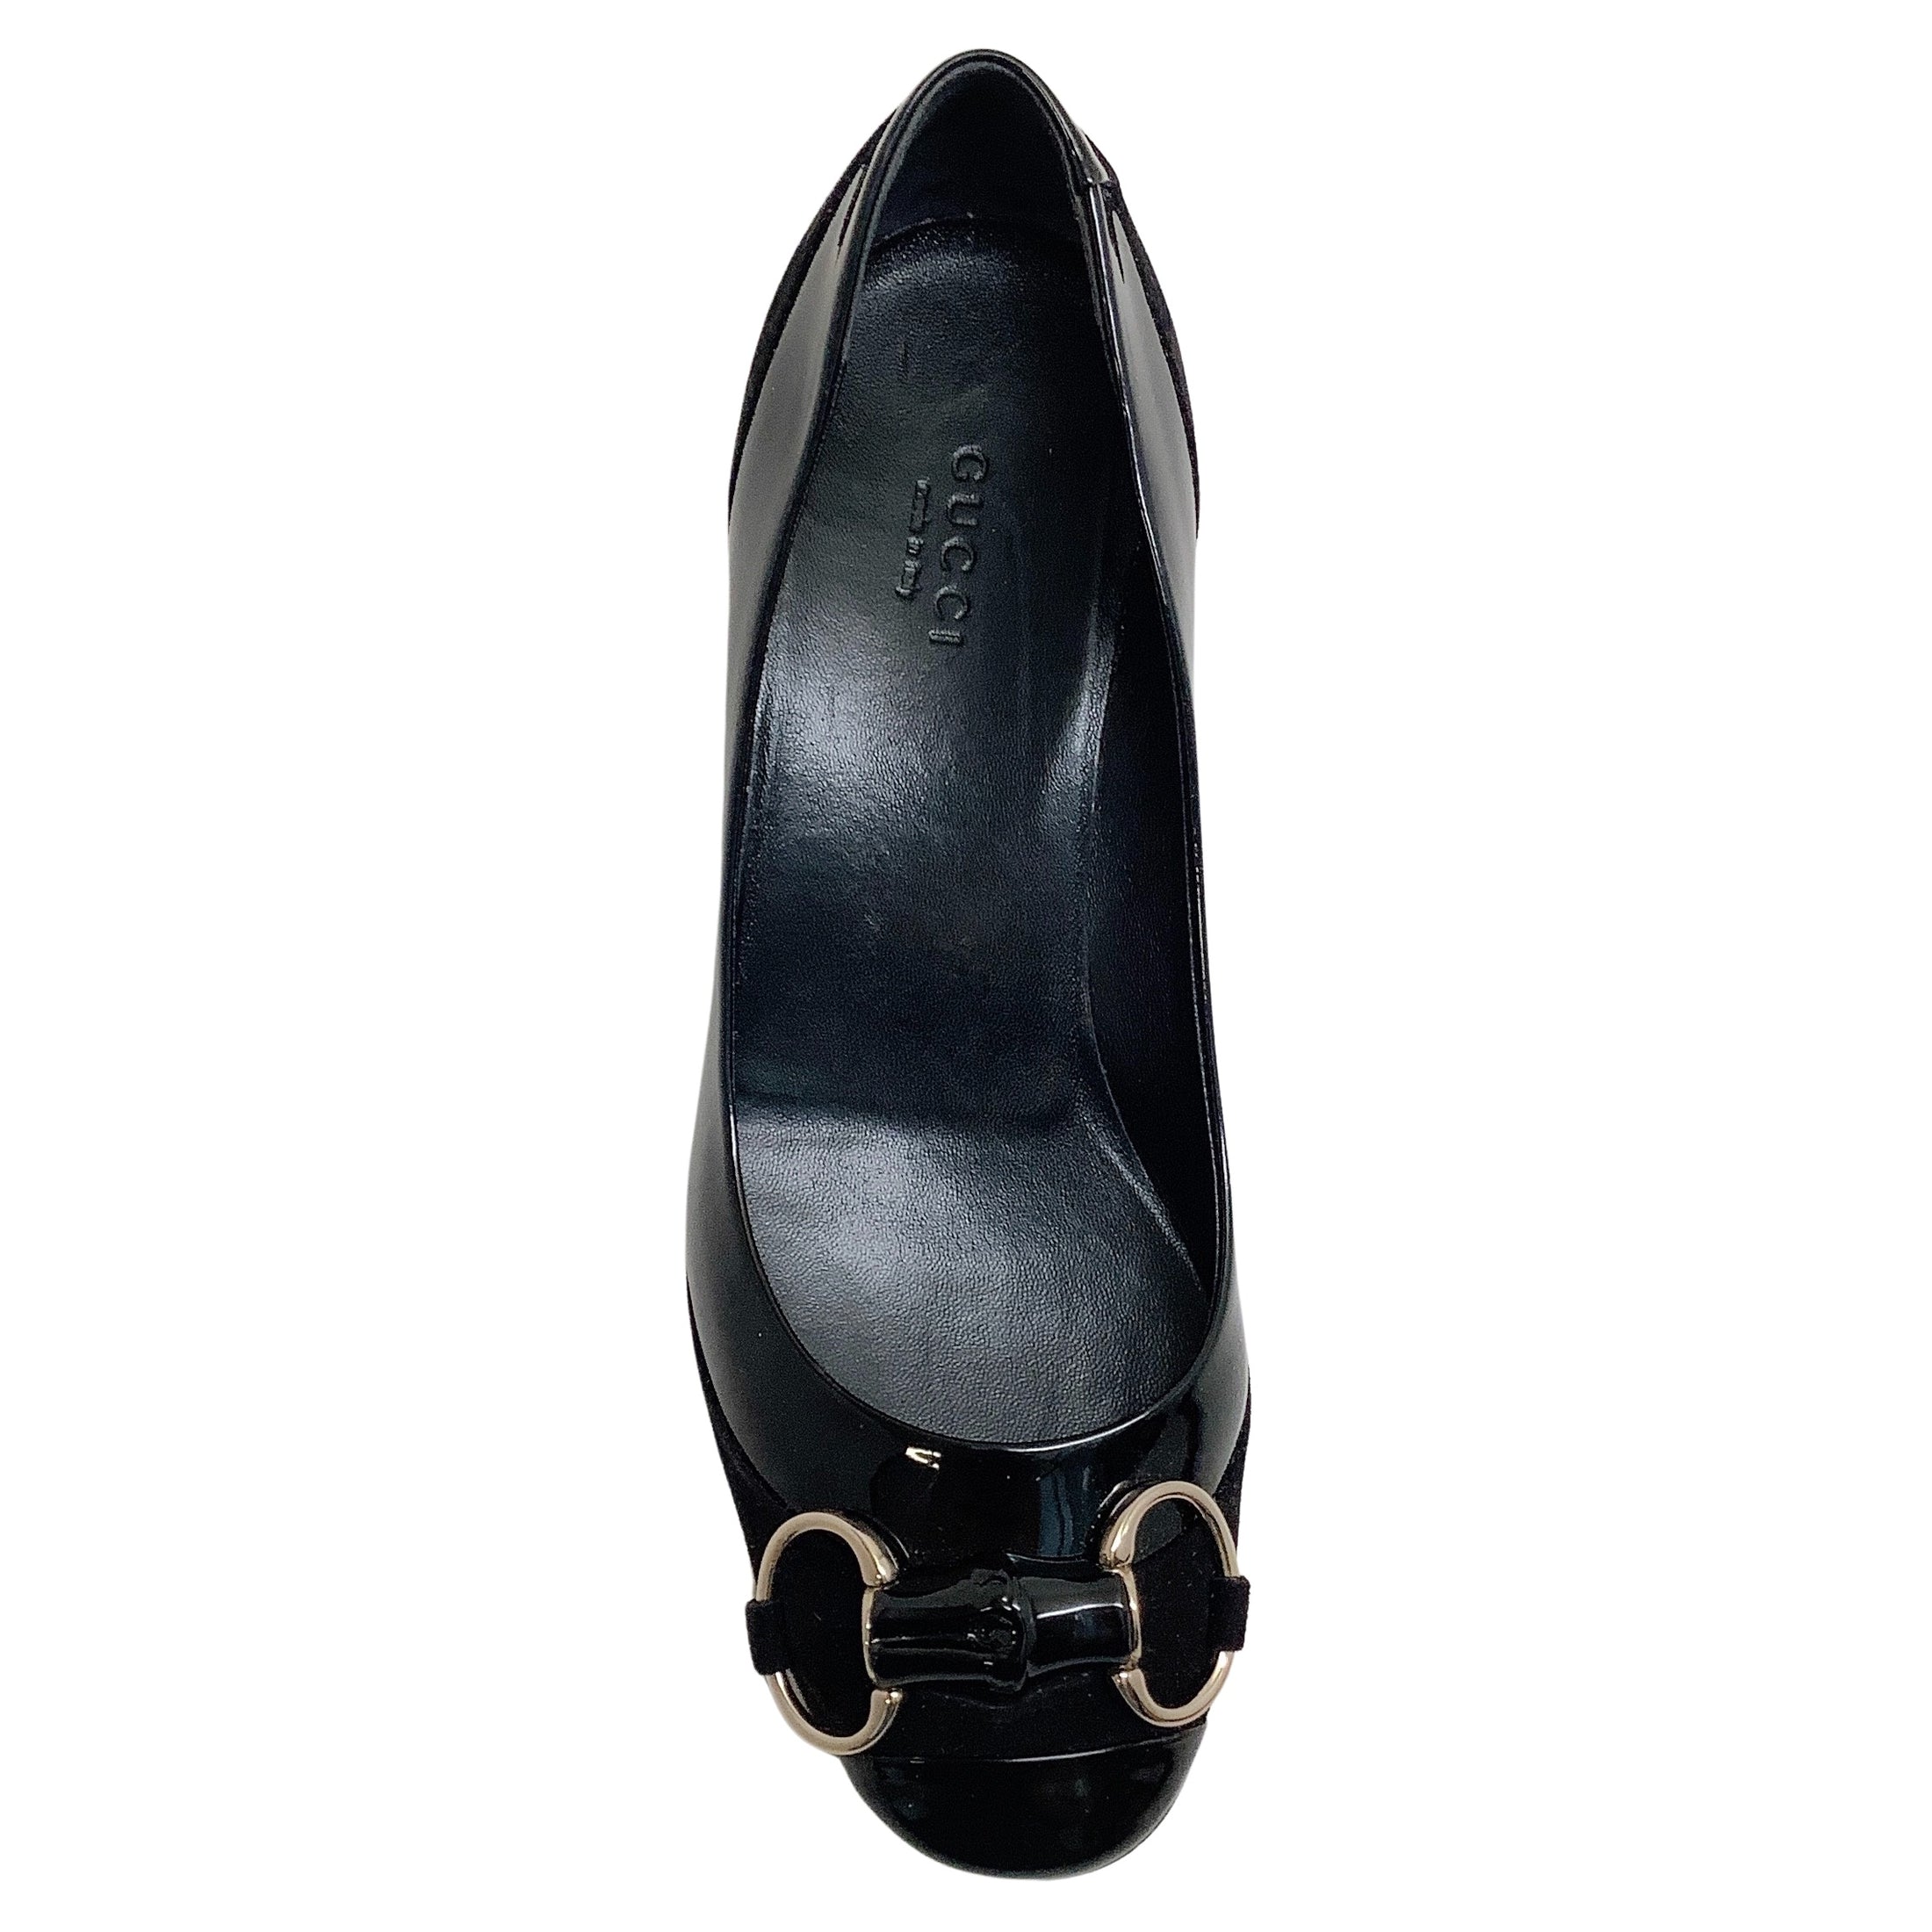 Gucci Black Patent / Suede Pumps with Silver Horsebit